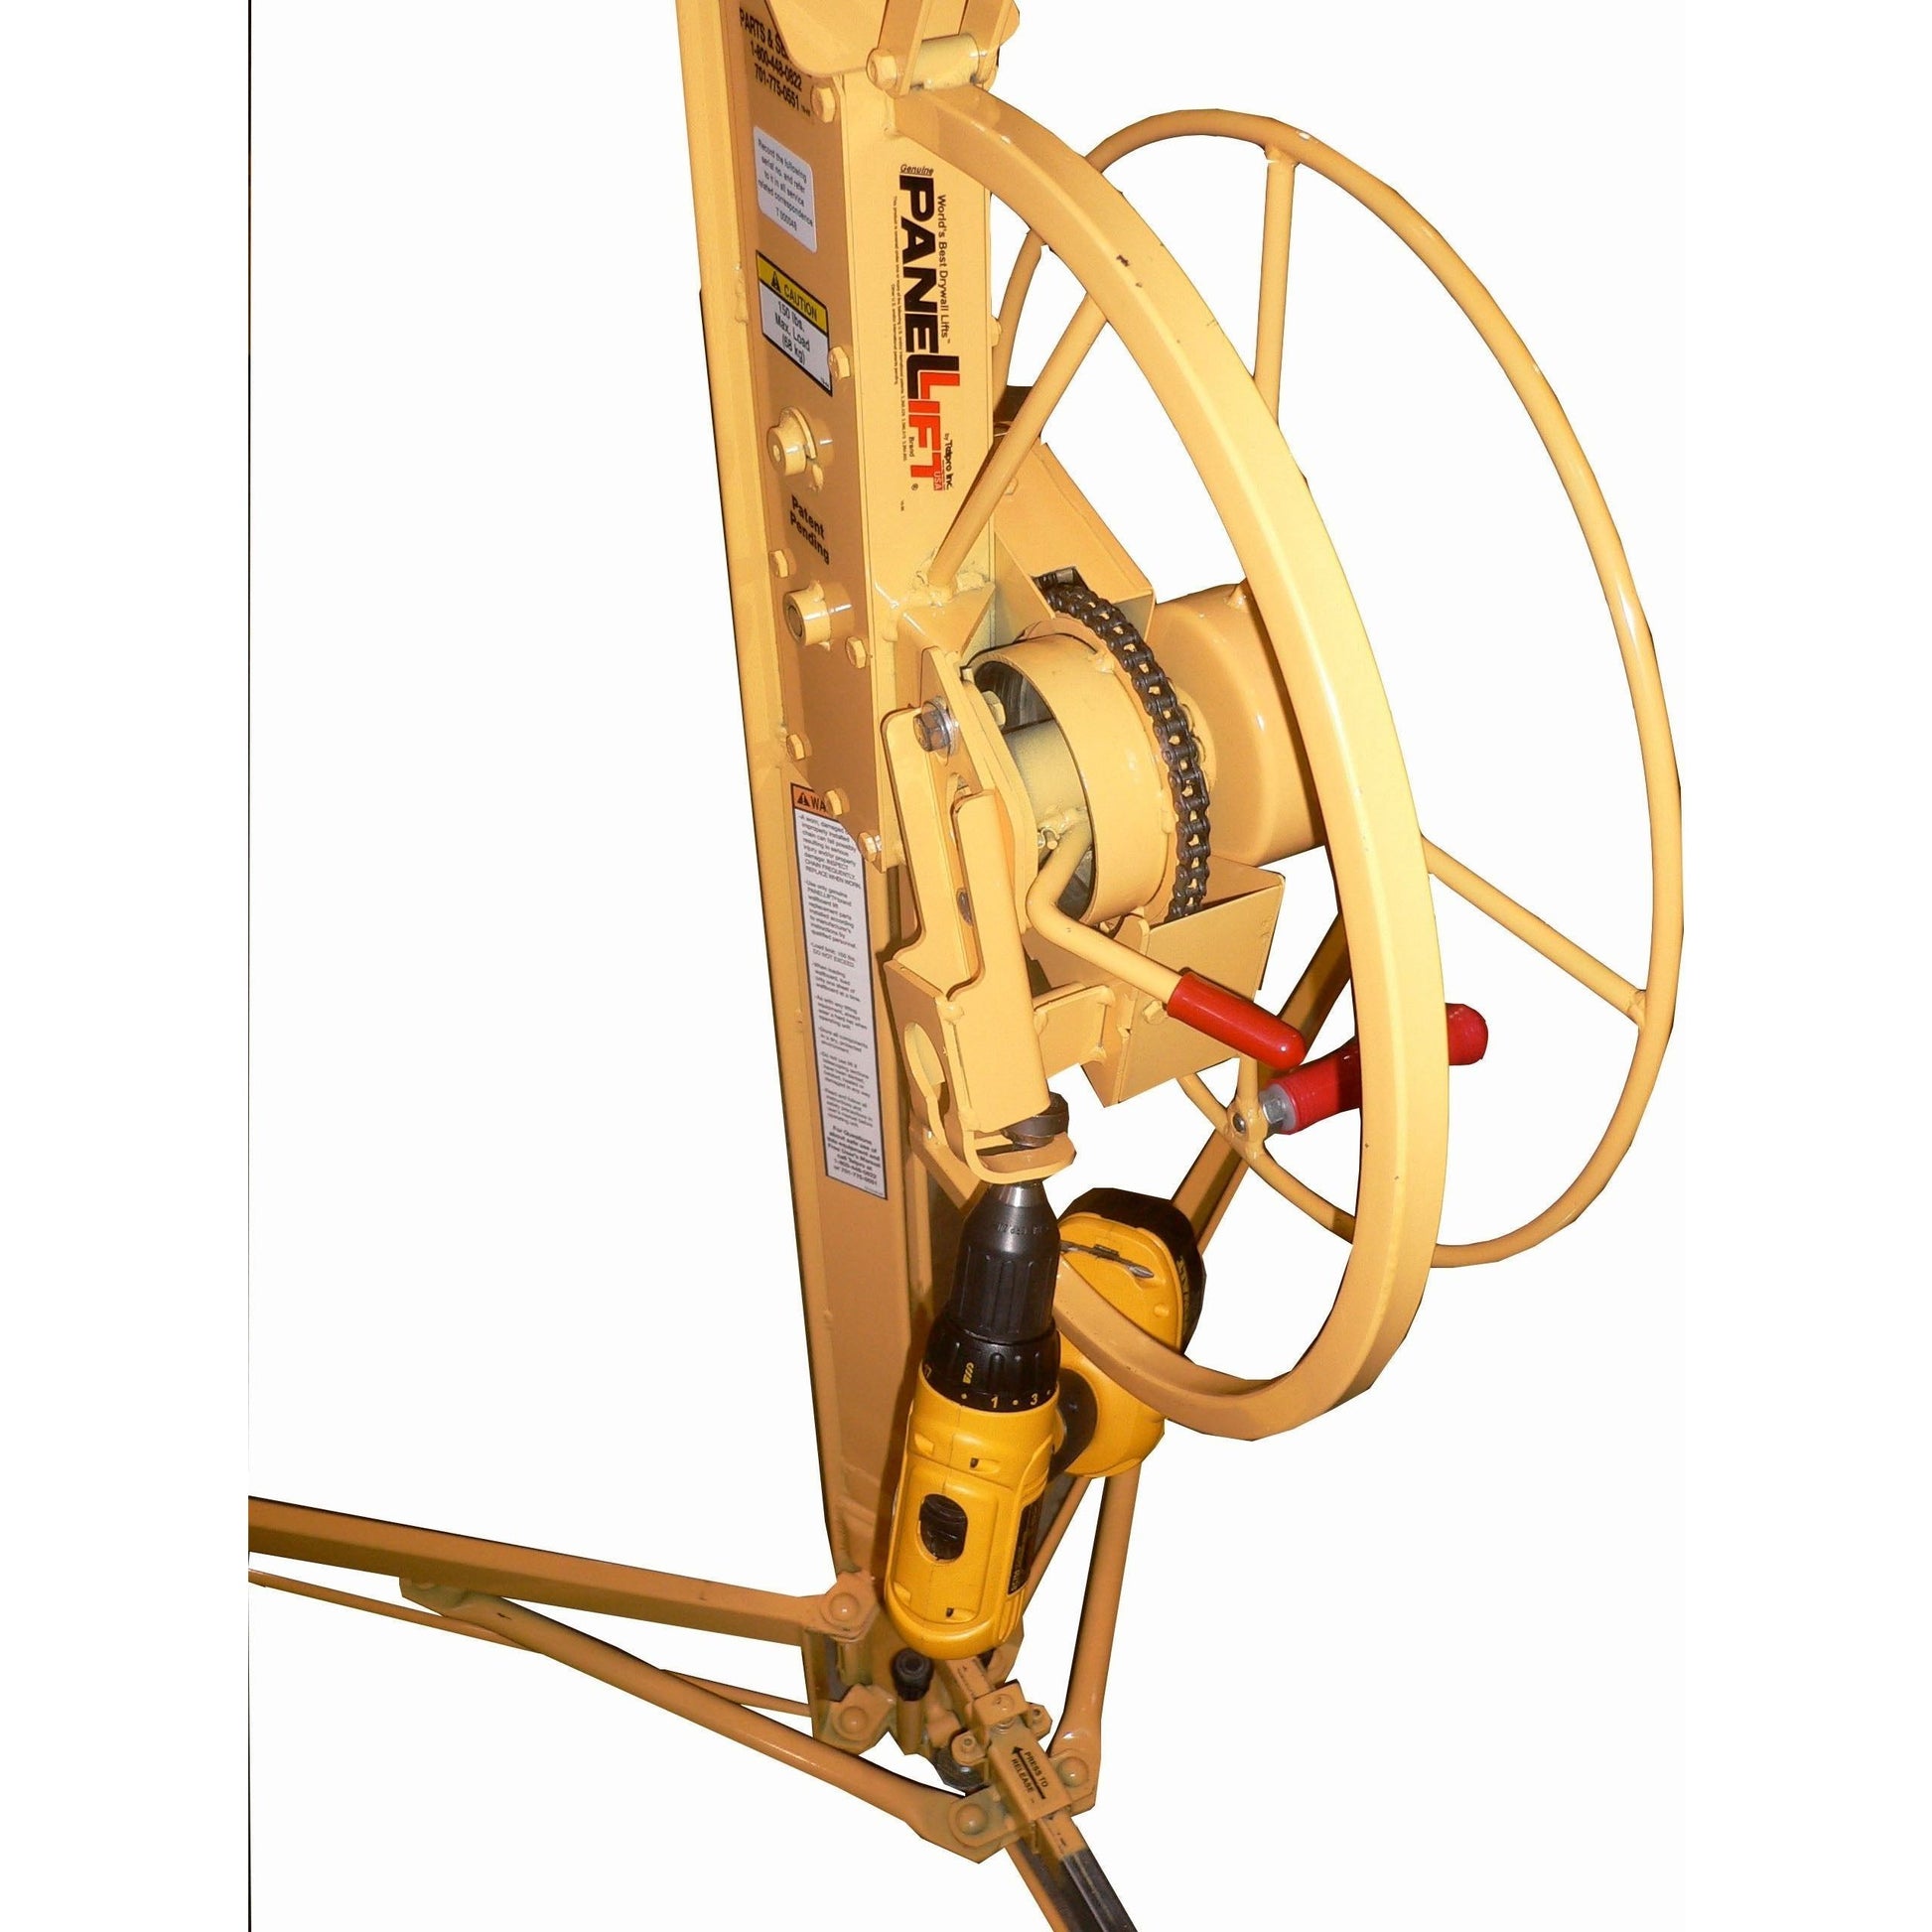 Panellift Model 1065 Drill Drive - Paragon Pro Manufacturing Solutions Inc.